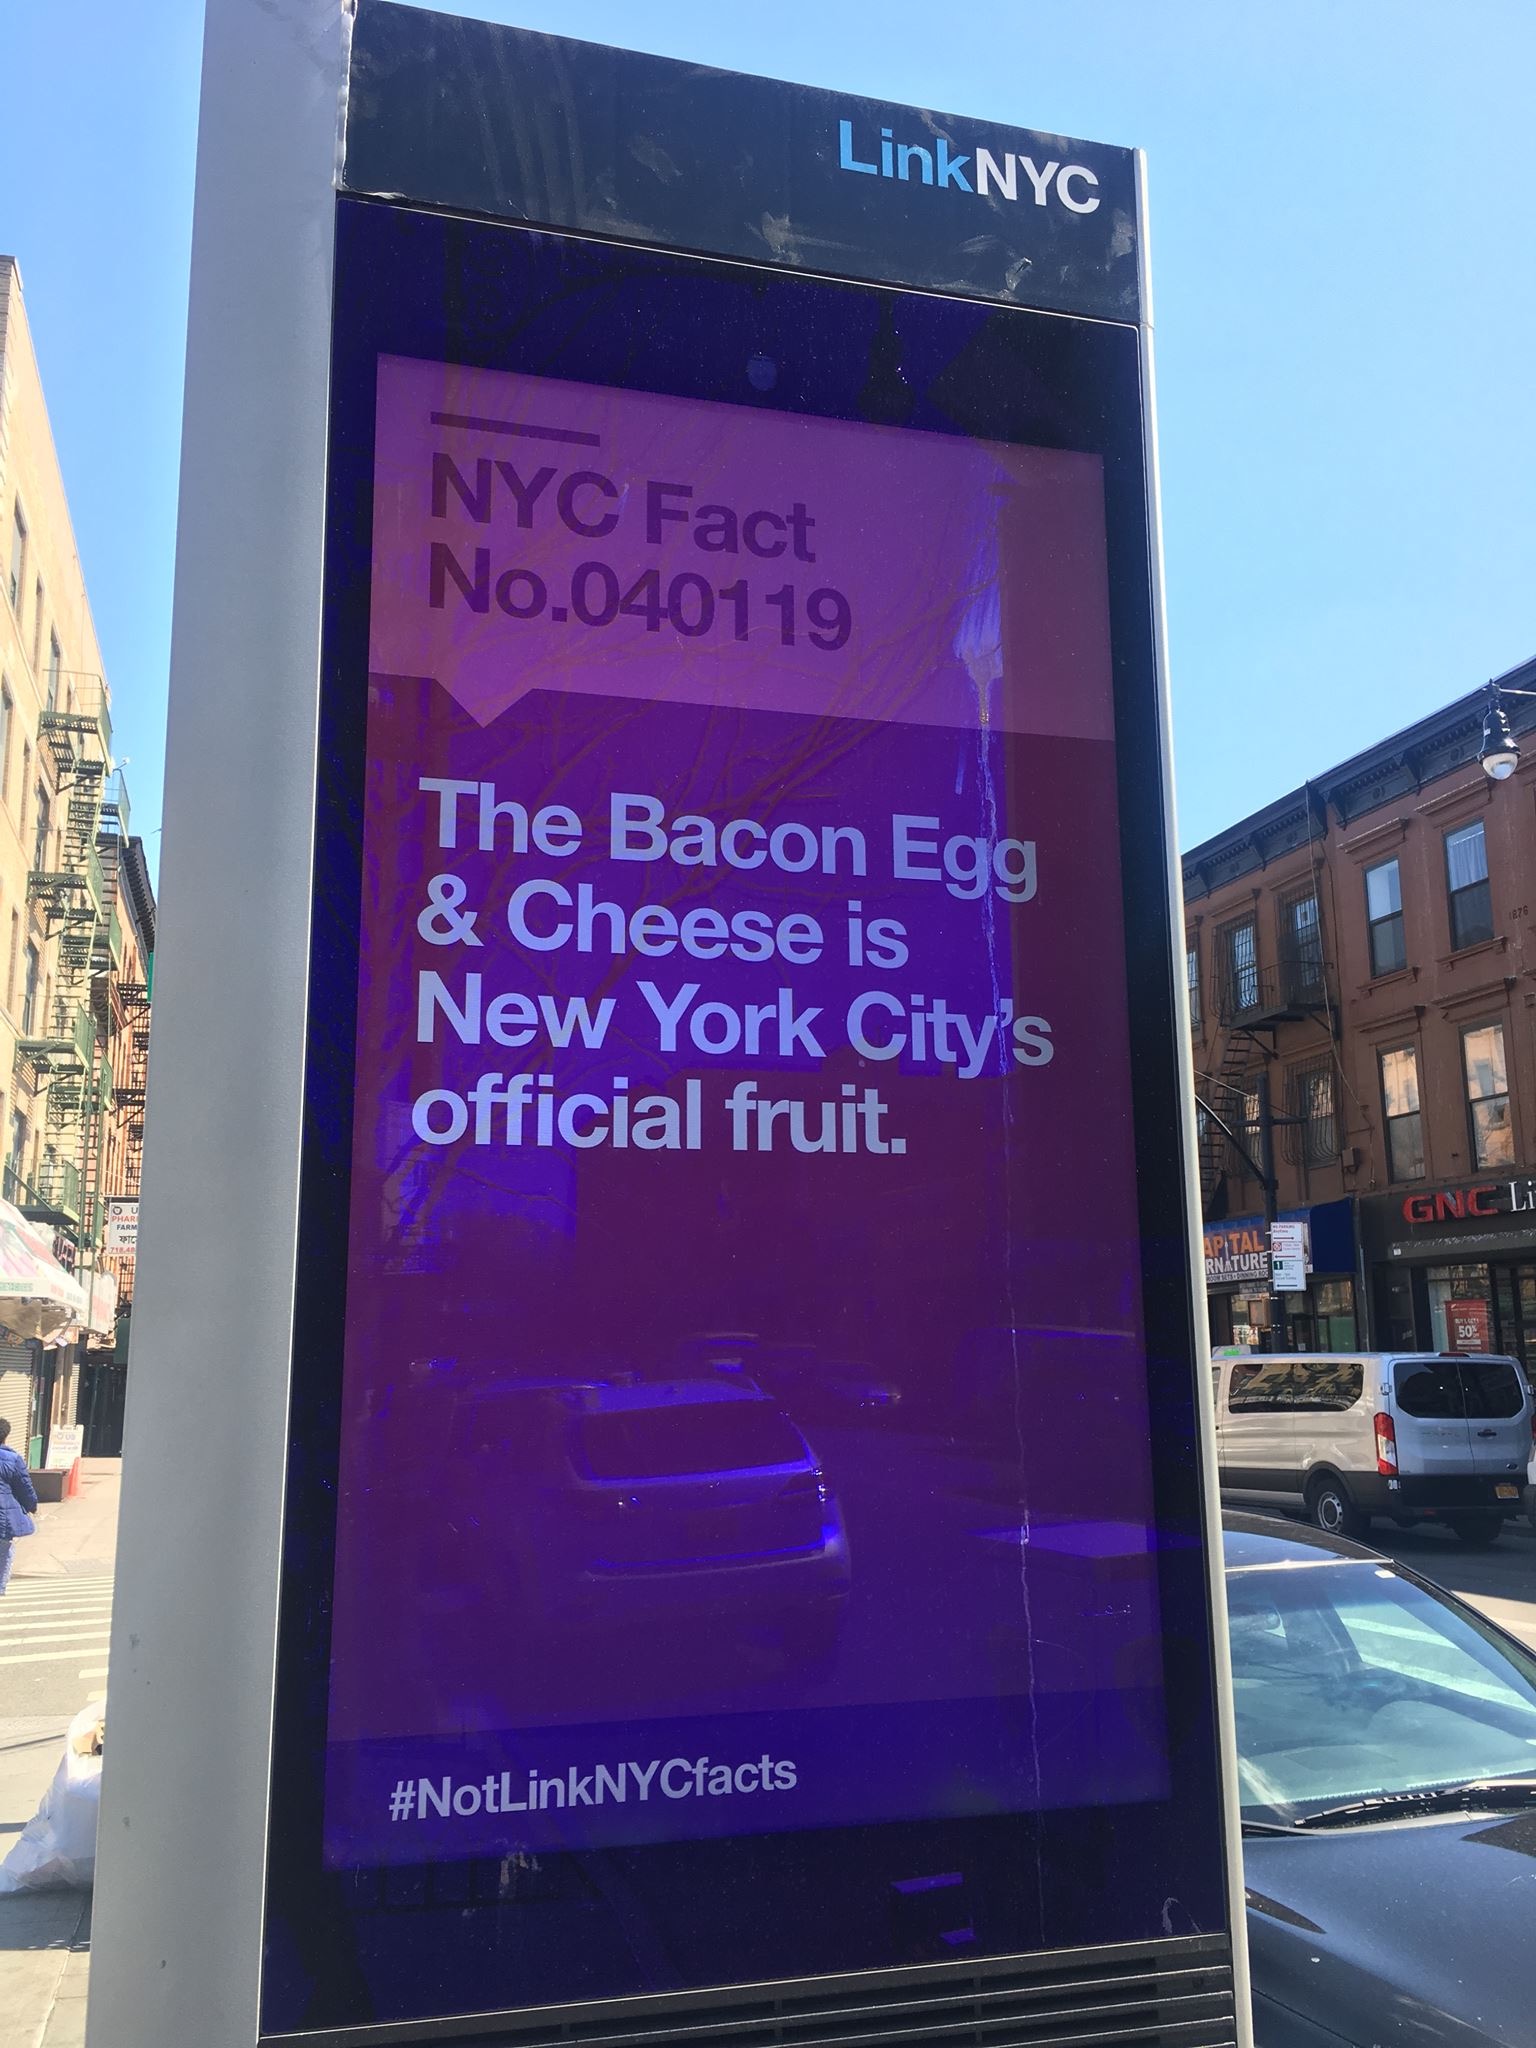 nyc fact 040119 - Link Nyc Nyc Fact No.040119 The Bacon Egg & Cheese is New York City's official fruit.